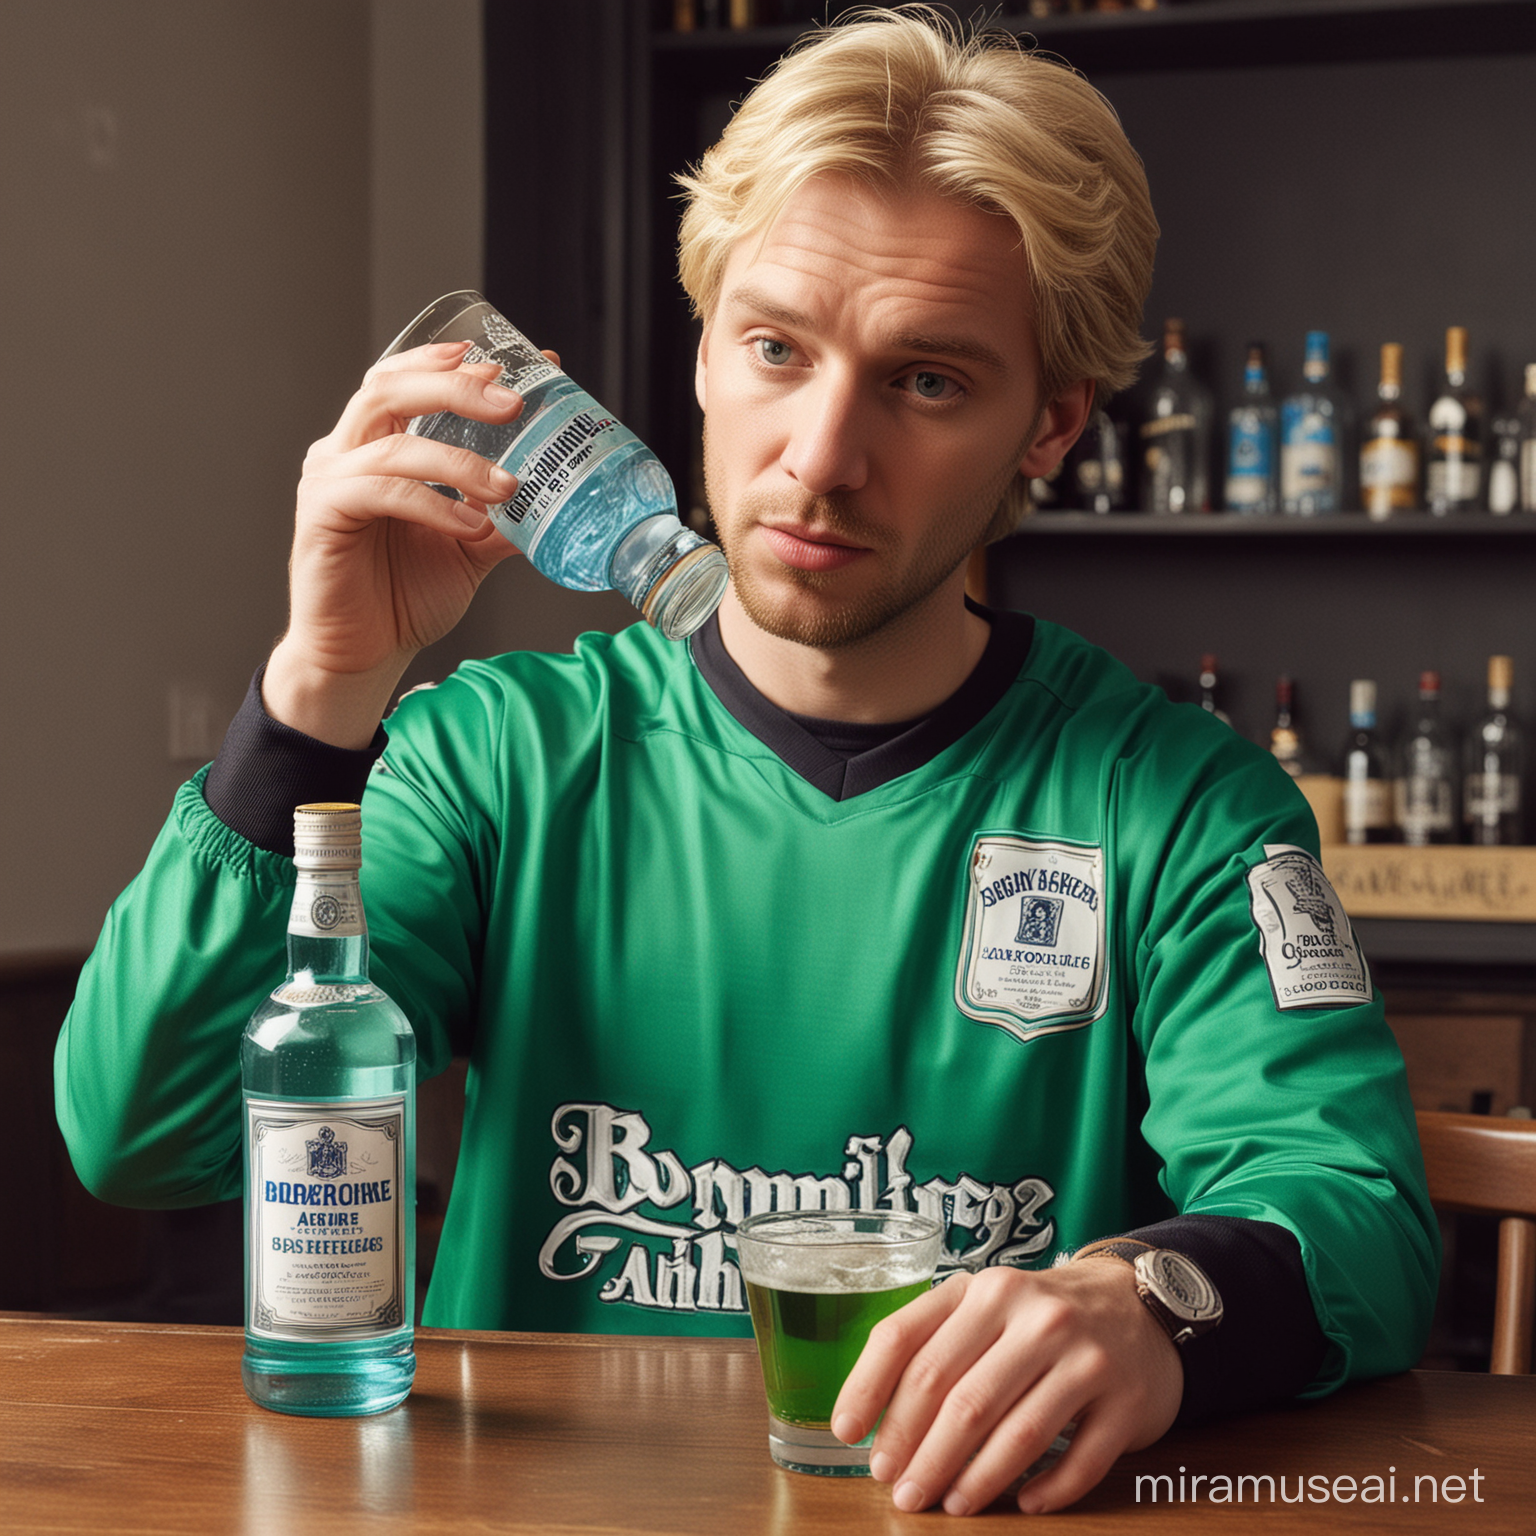 An alcoholic white man with blonde hair, he is drinking alcohol, he is wearing a green hockey jersey, there is a bottle of Bombay Sapphire Gin